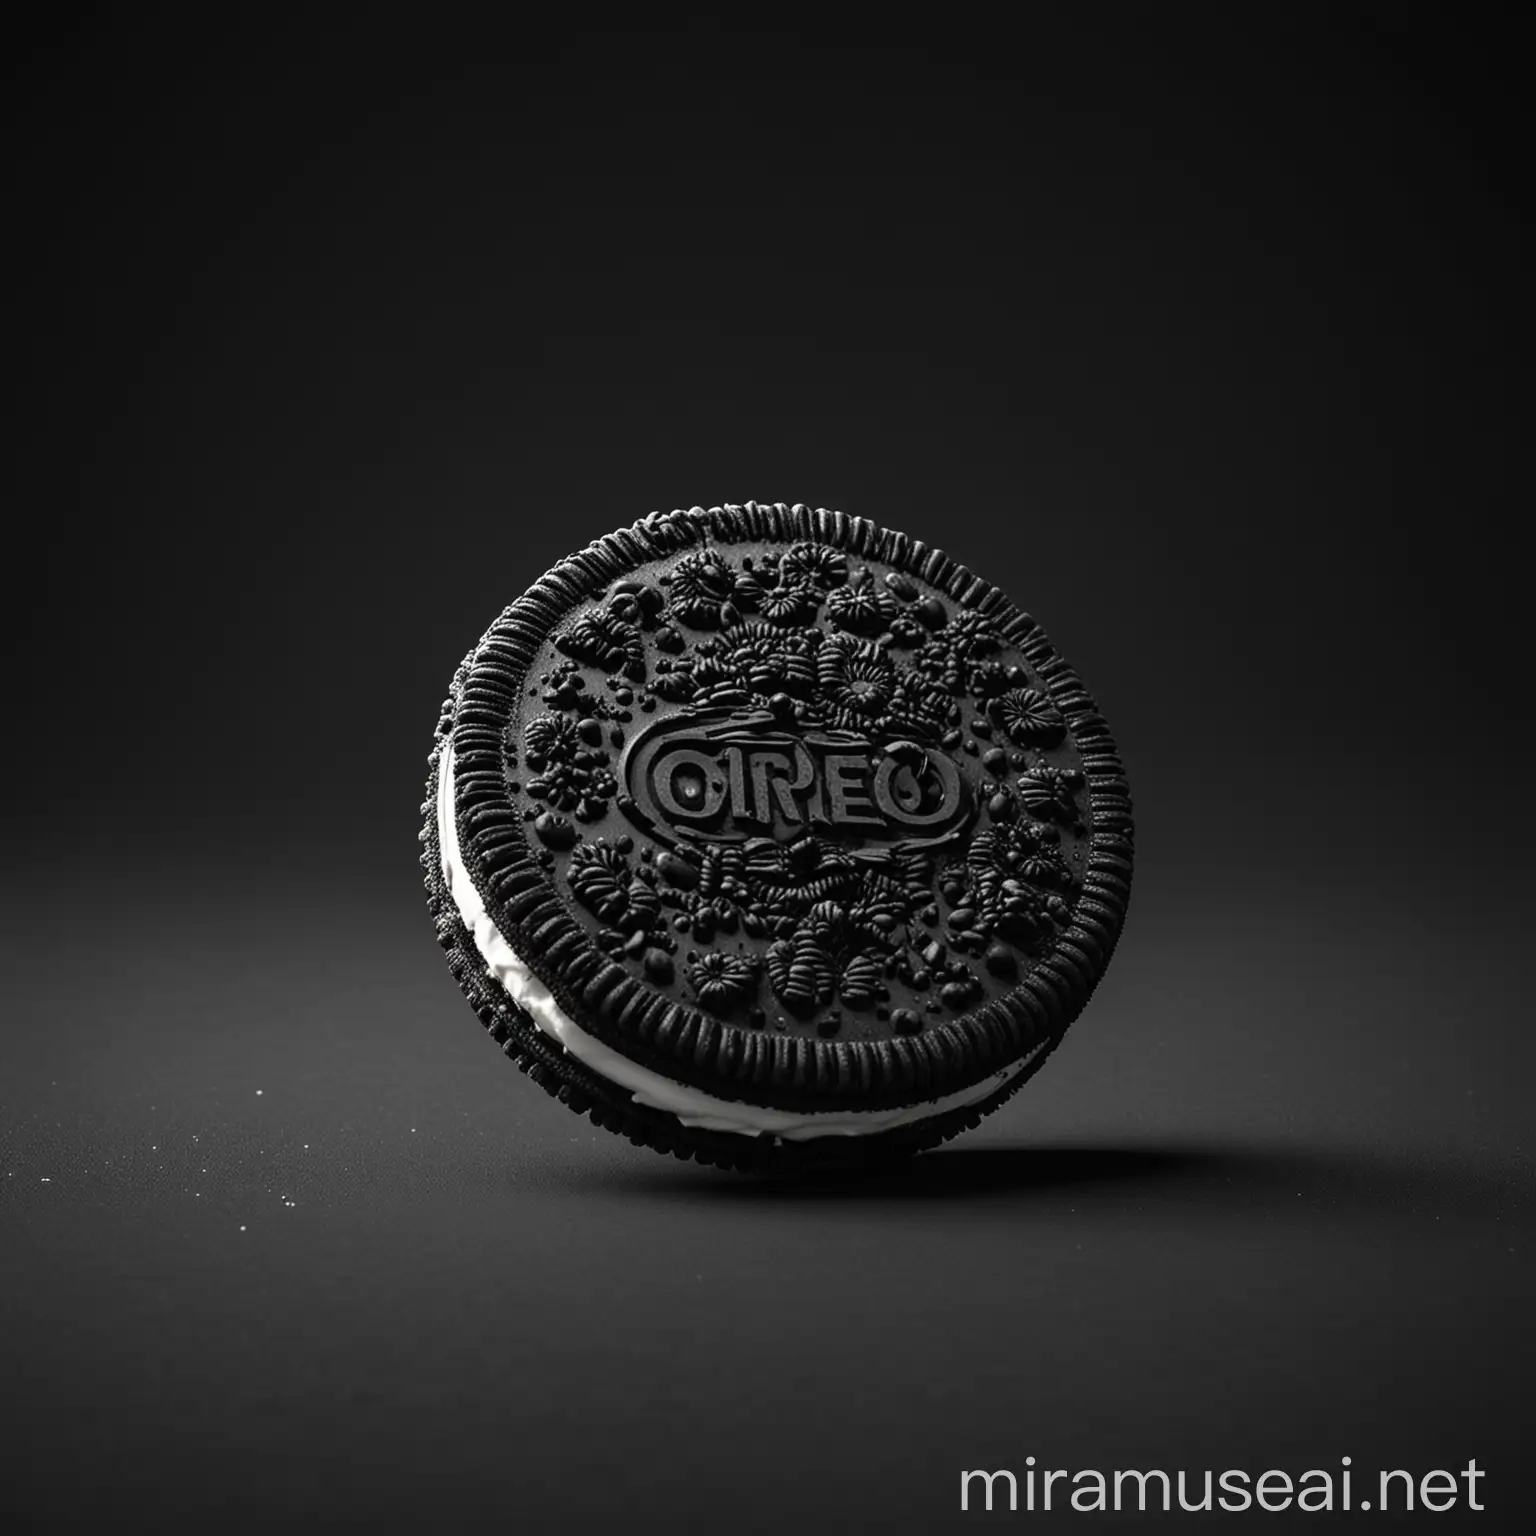 Ultra Realistic Oreo Cookies on Black Background in 4K Resolution